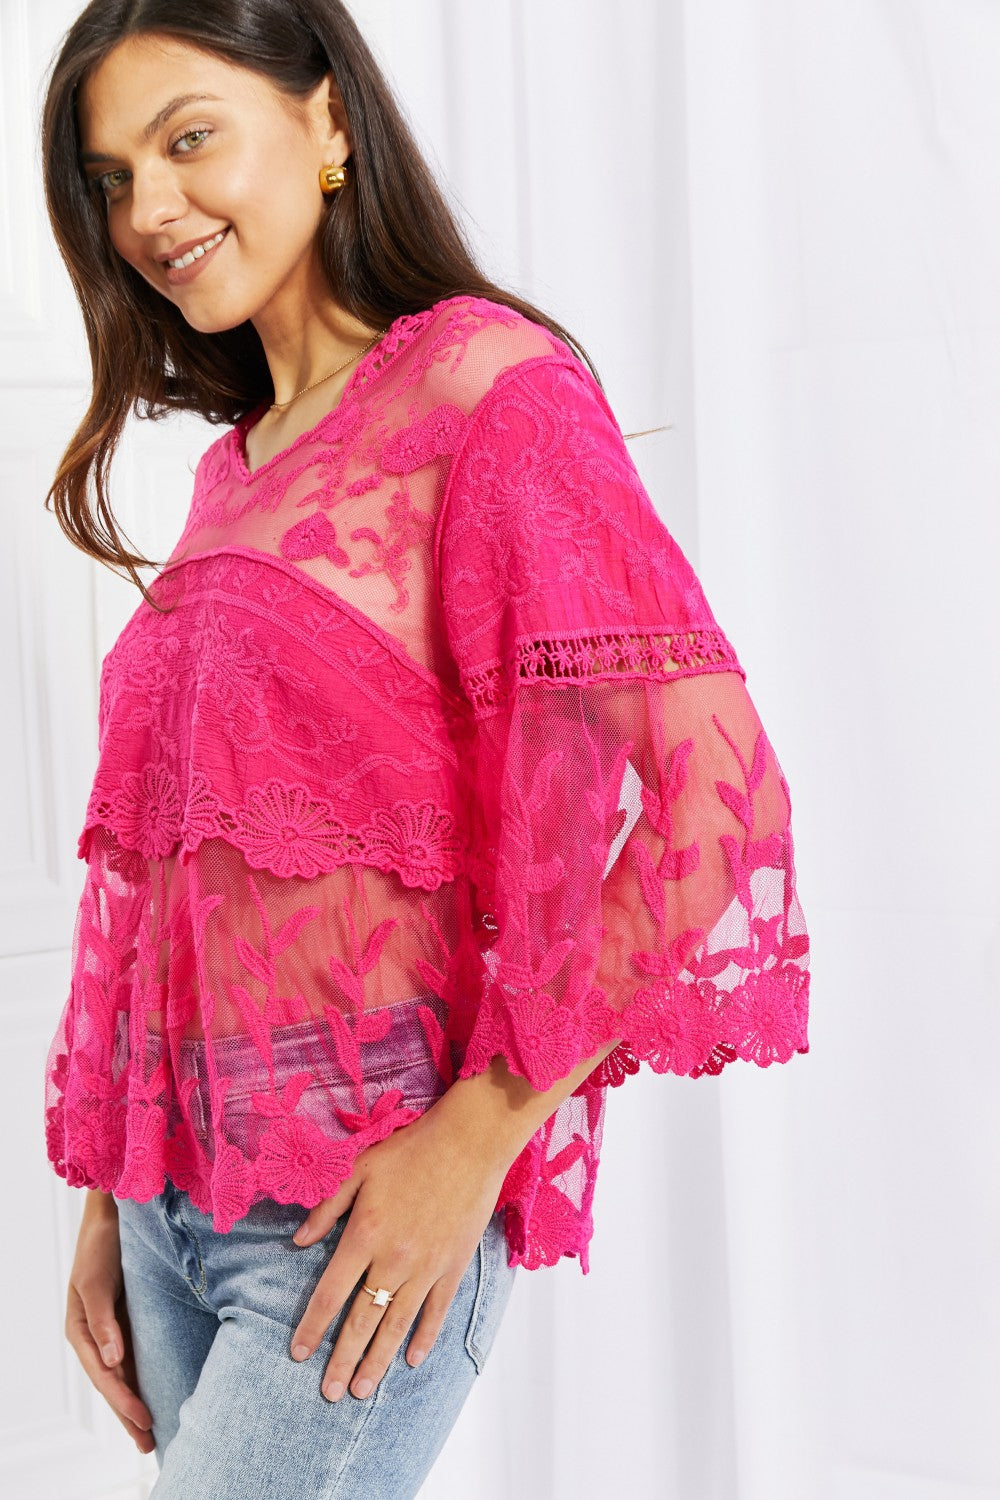 Carlita Cotton Lace Blouse in Hot Pink